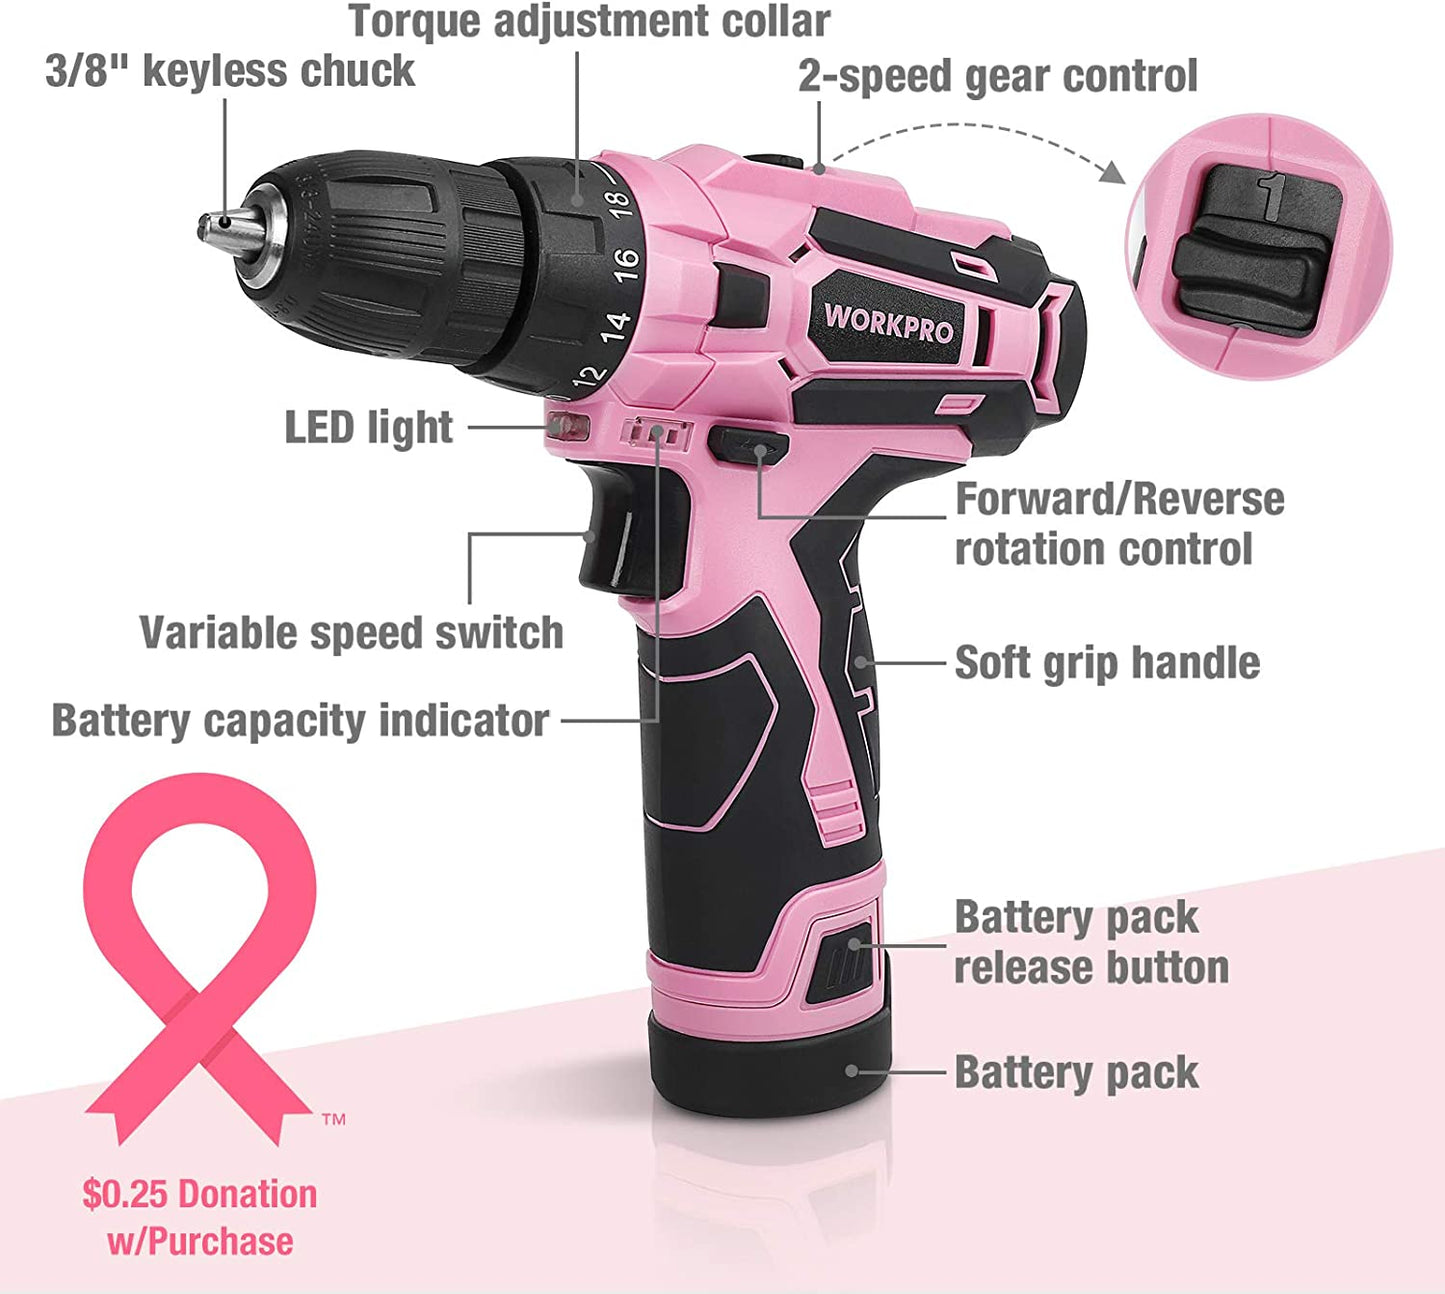 12V Pink Cordless Drill Driver and Home Tool Kit, 61-Piece Hand Tool Set for DIY, Home Maintenance, 14-inch Storage Bag Included - Pink Ribbon